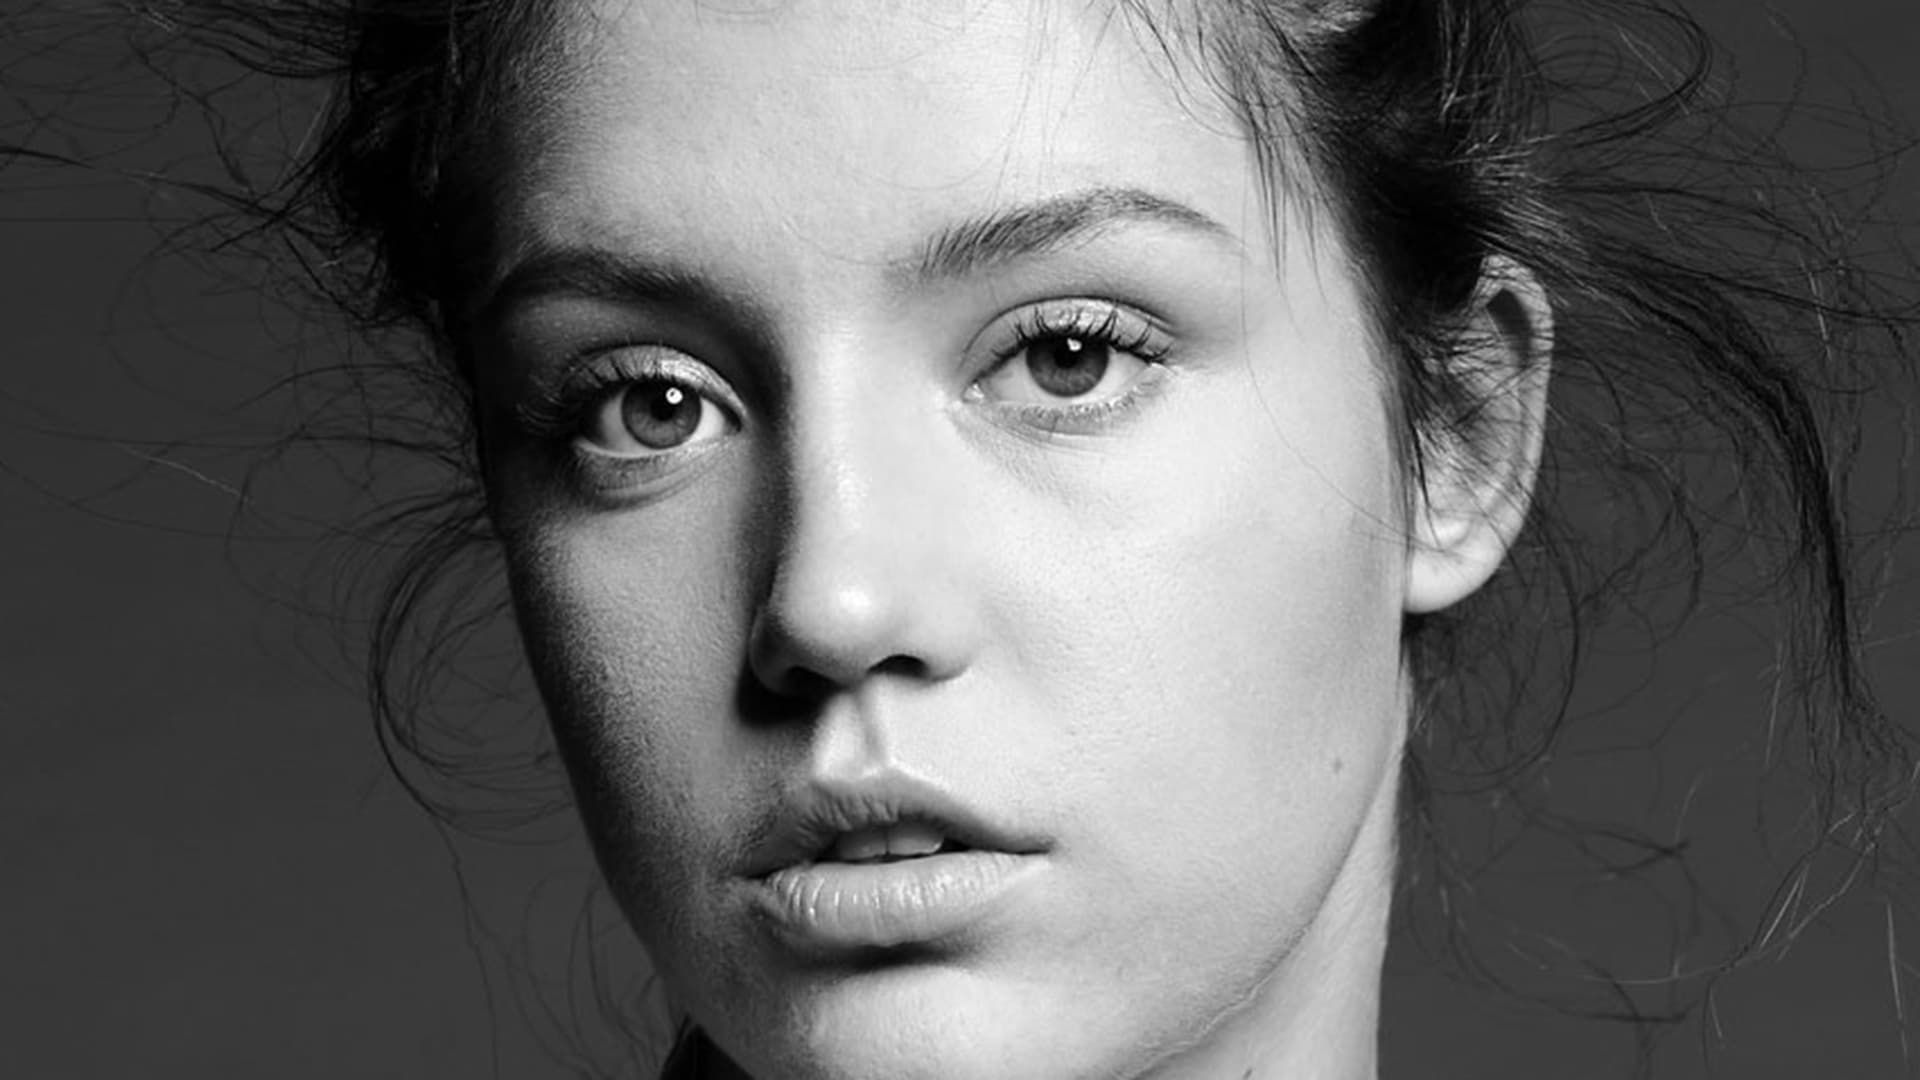 Adele exarchopoulos wallsdesk HD wallpapers